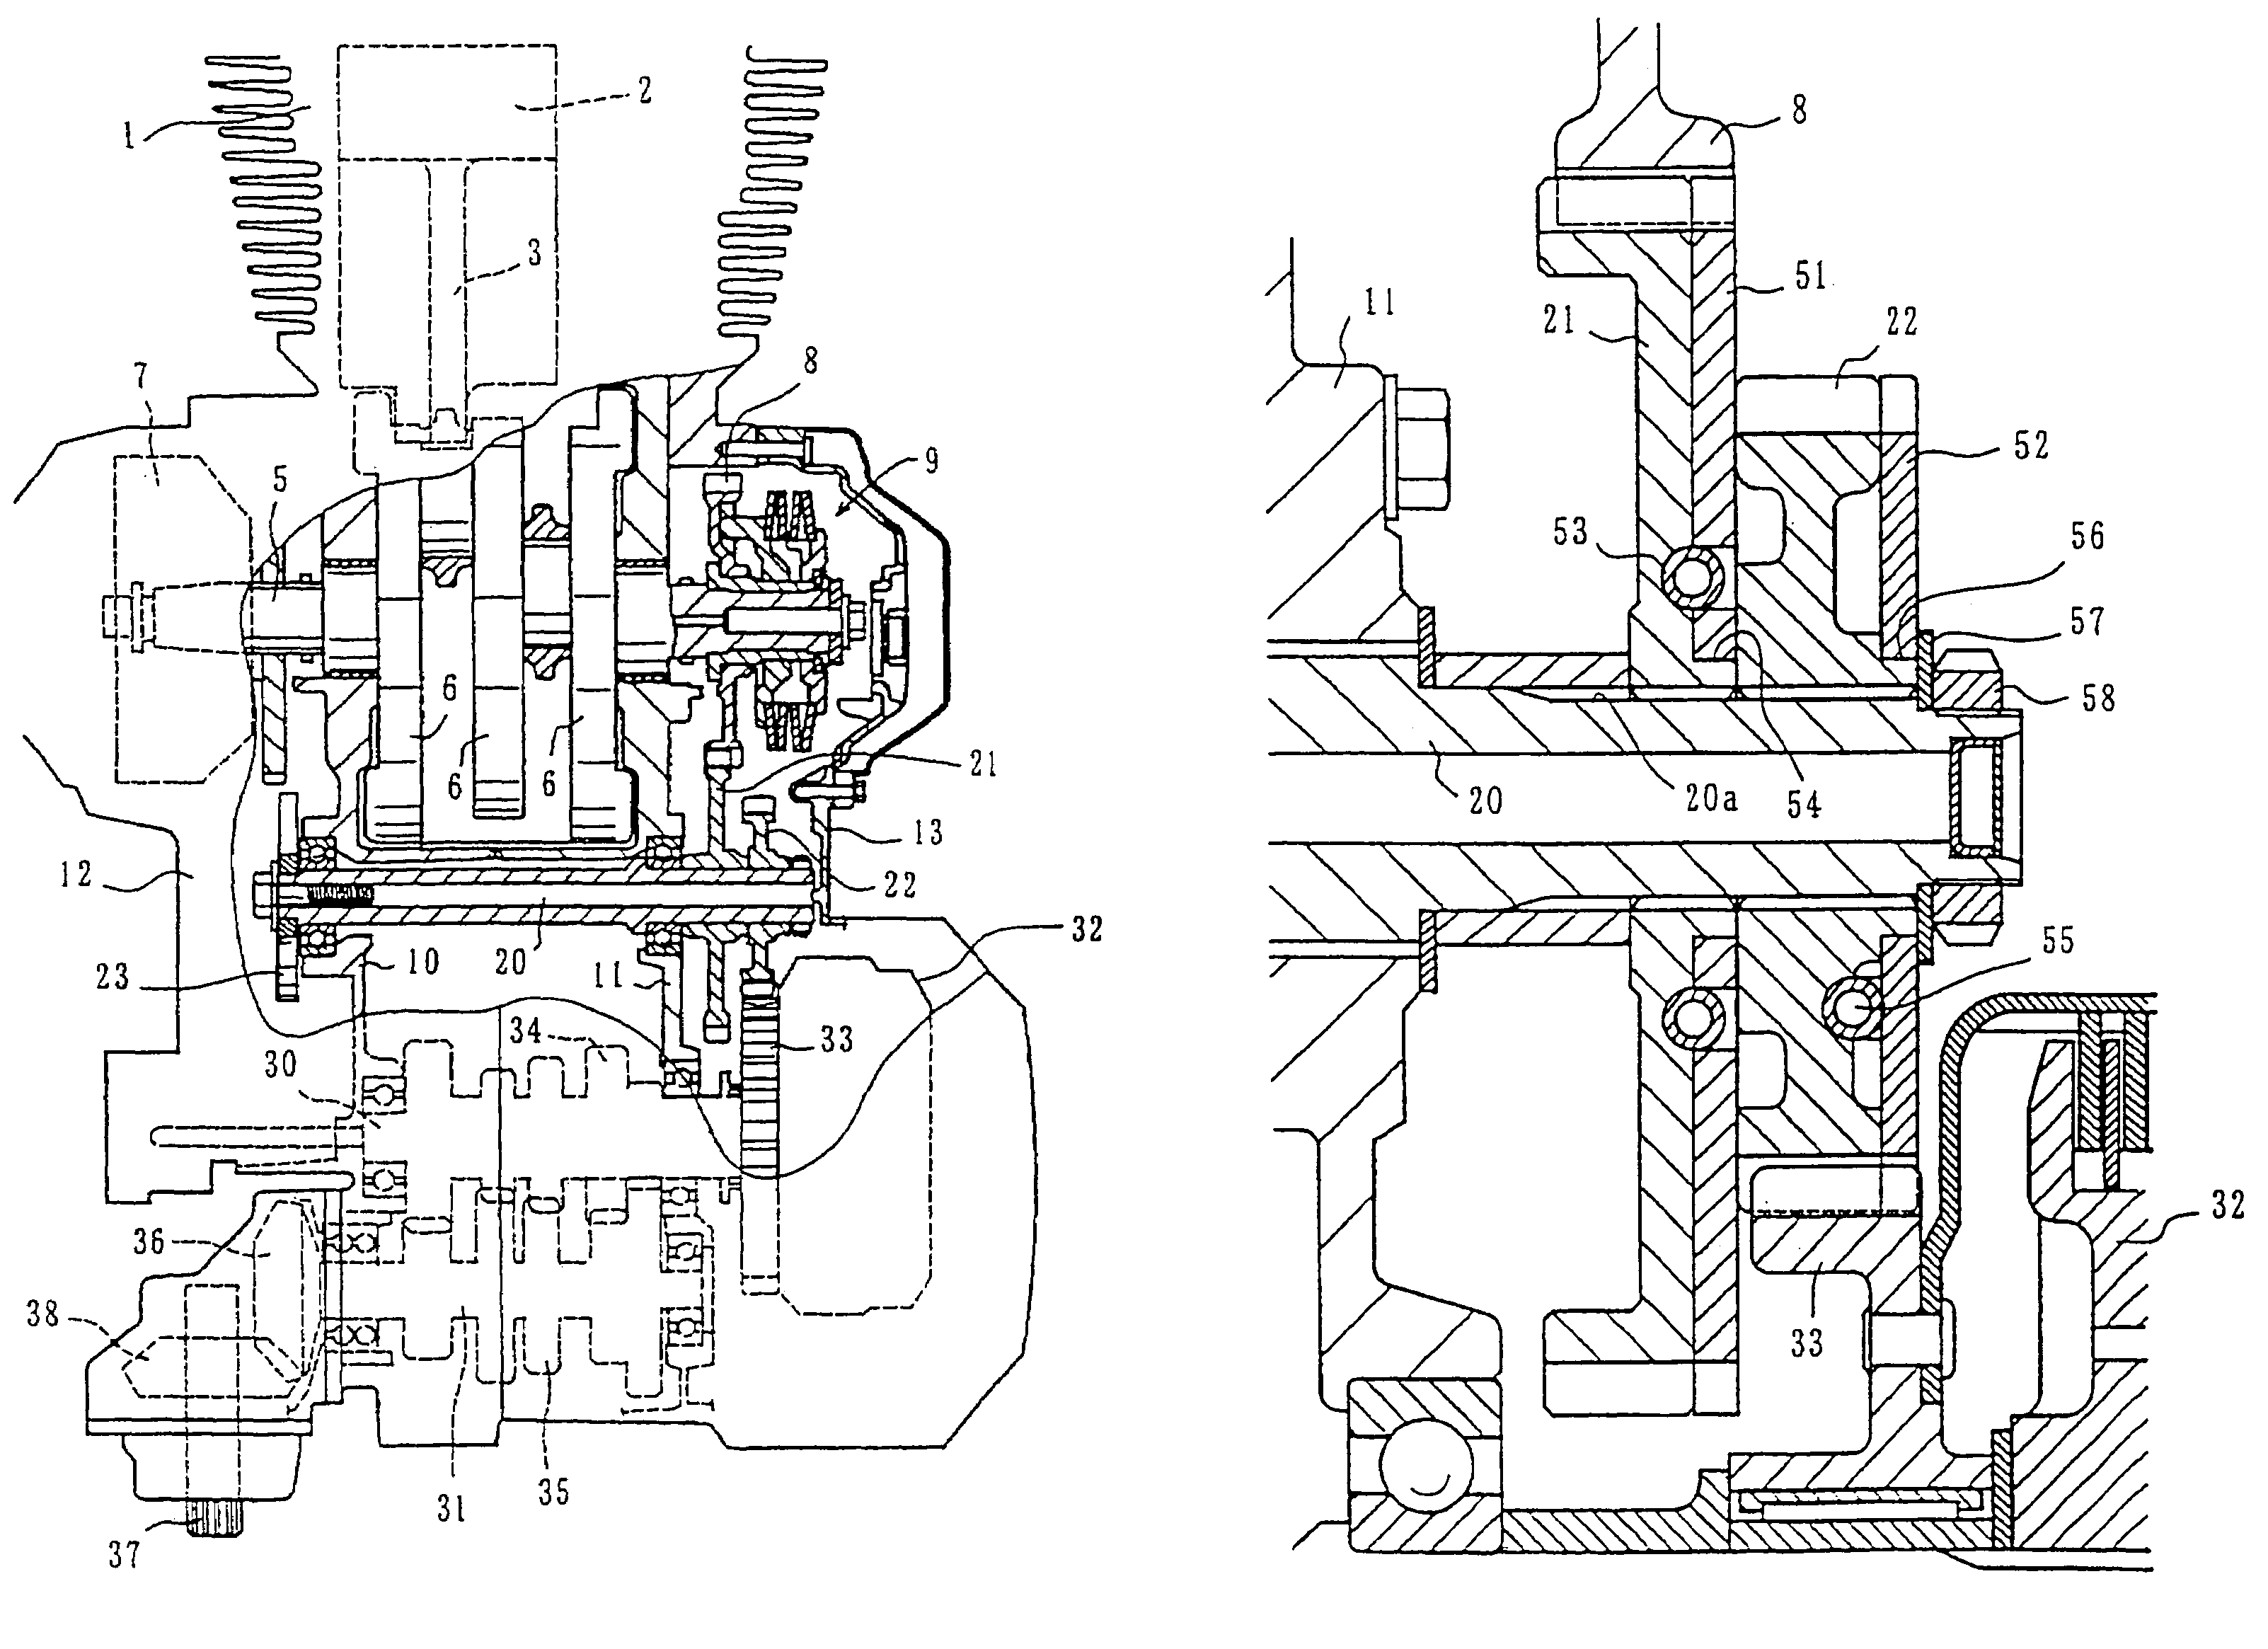 Structure for transmitting power of a motorcycle engine, and a method of assembly of said structure